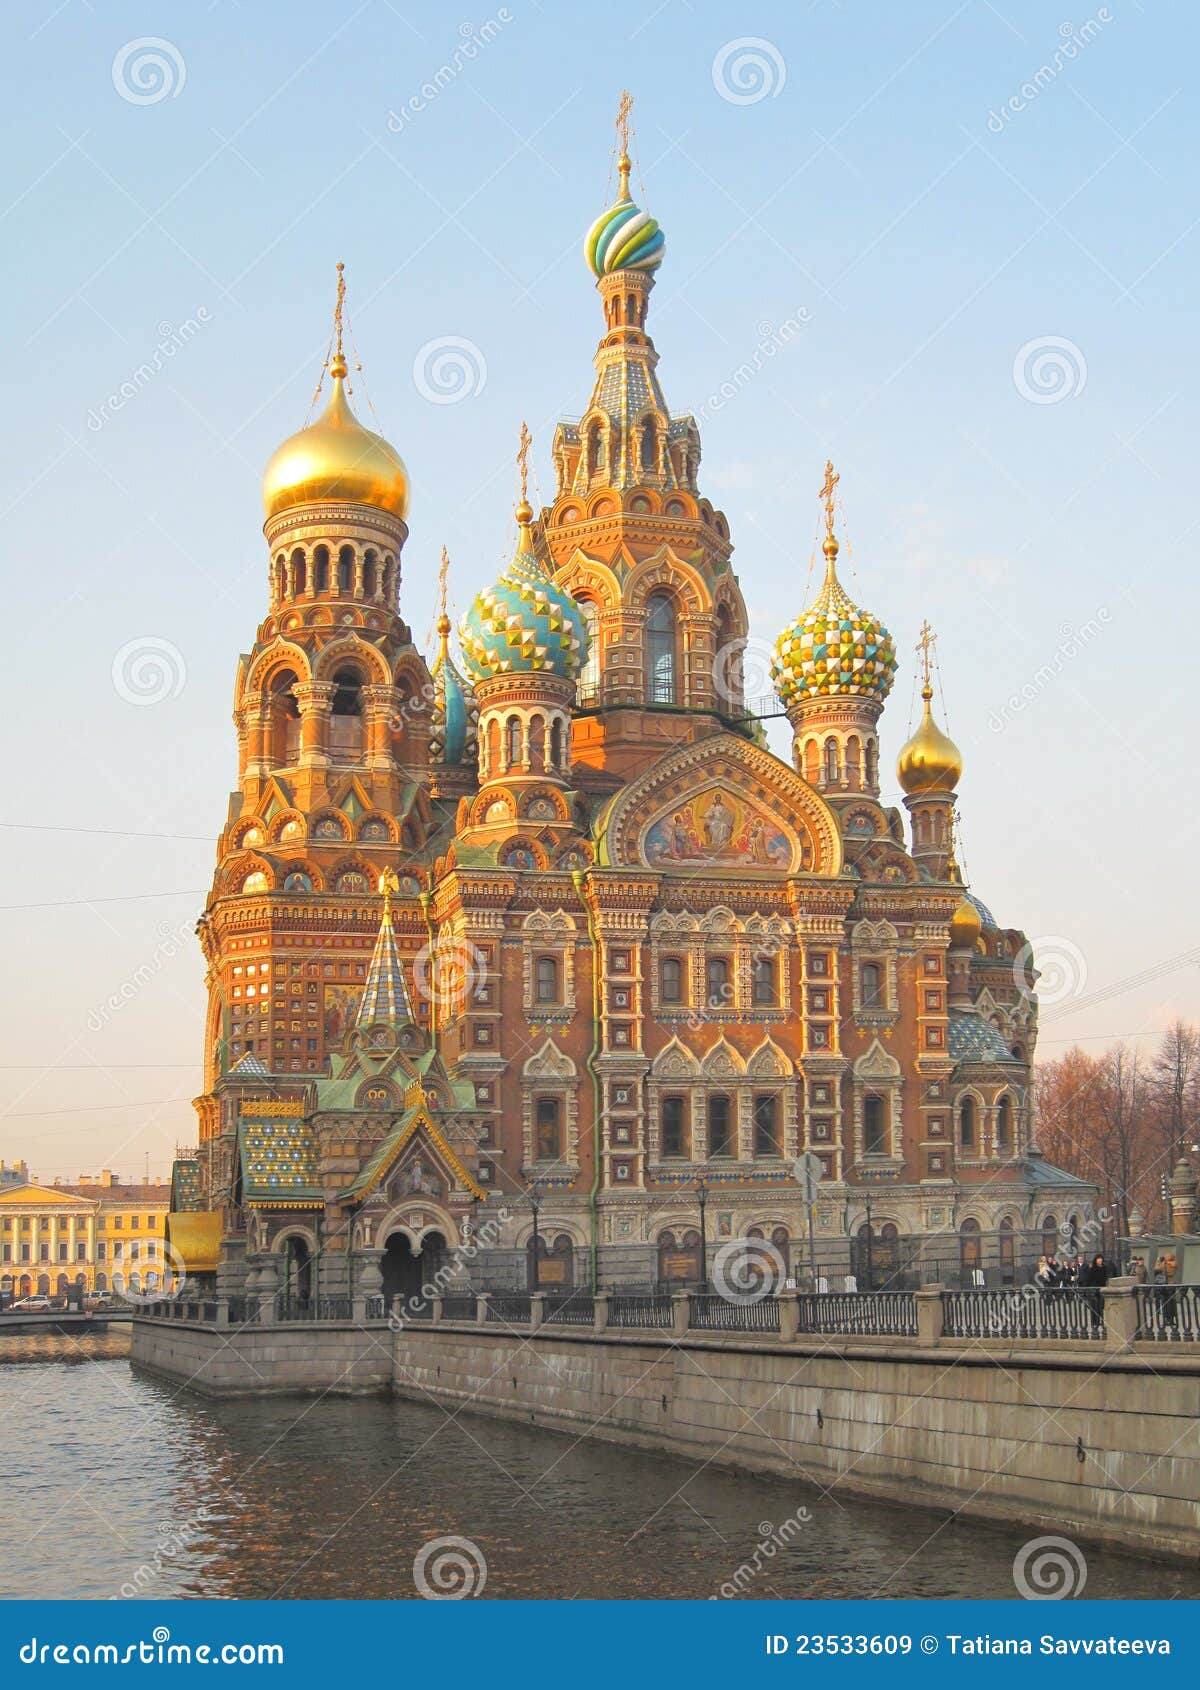 St. Petersburg stock image. Image of chanel, grand, cathedral